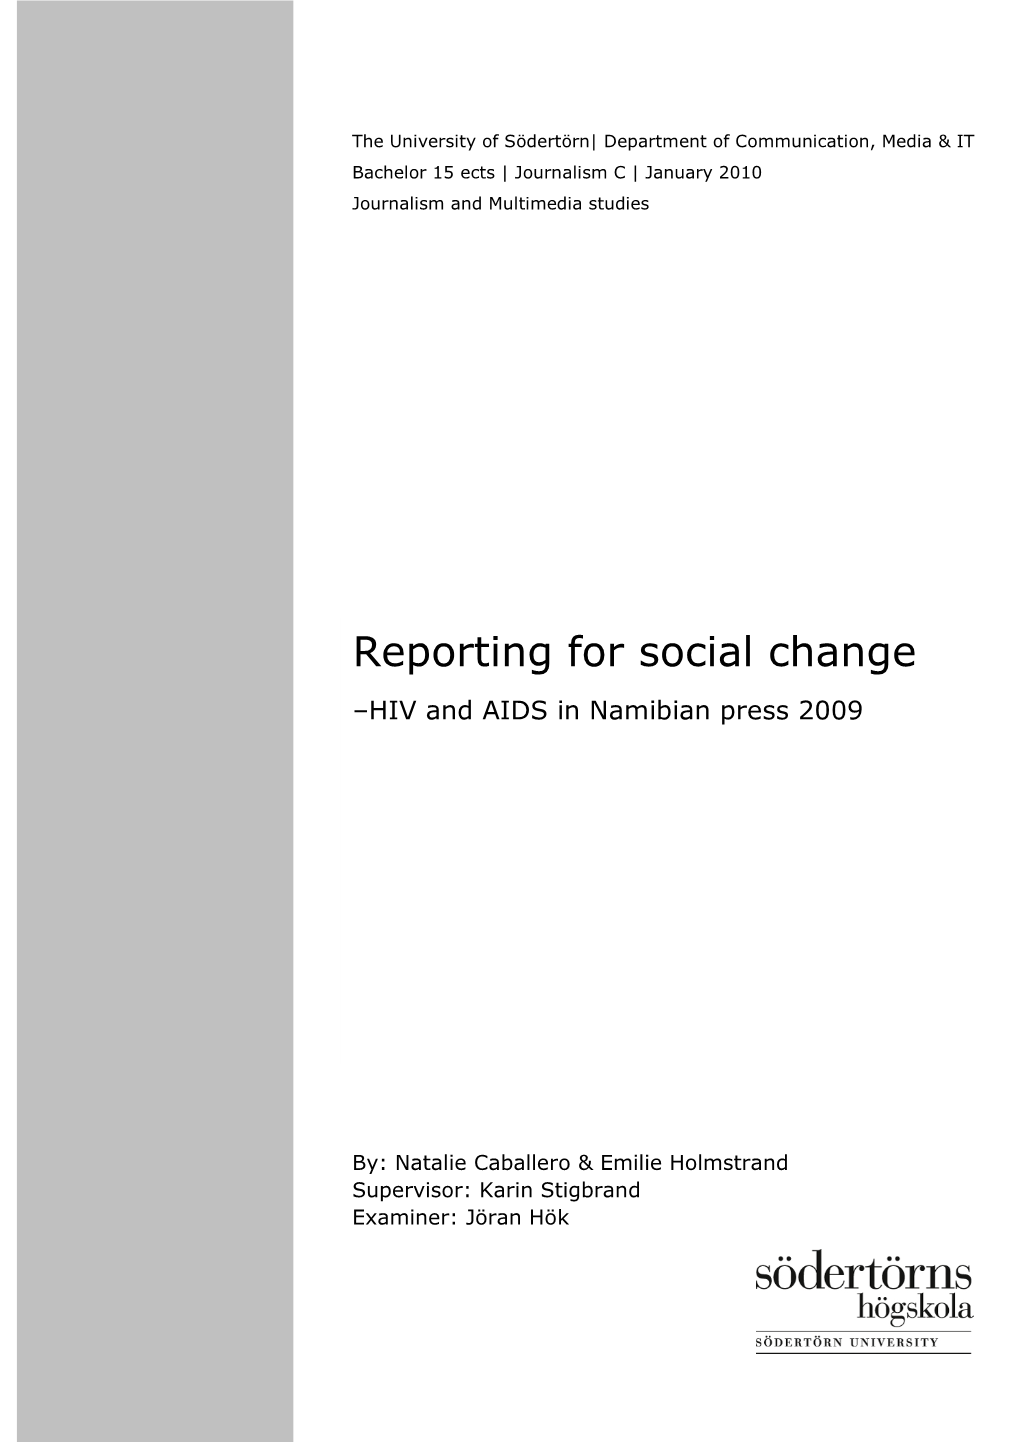 Reporting for Social Change –HIV and AIDS in Namibian Press 2009